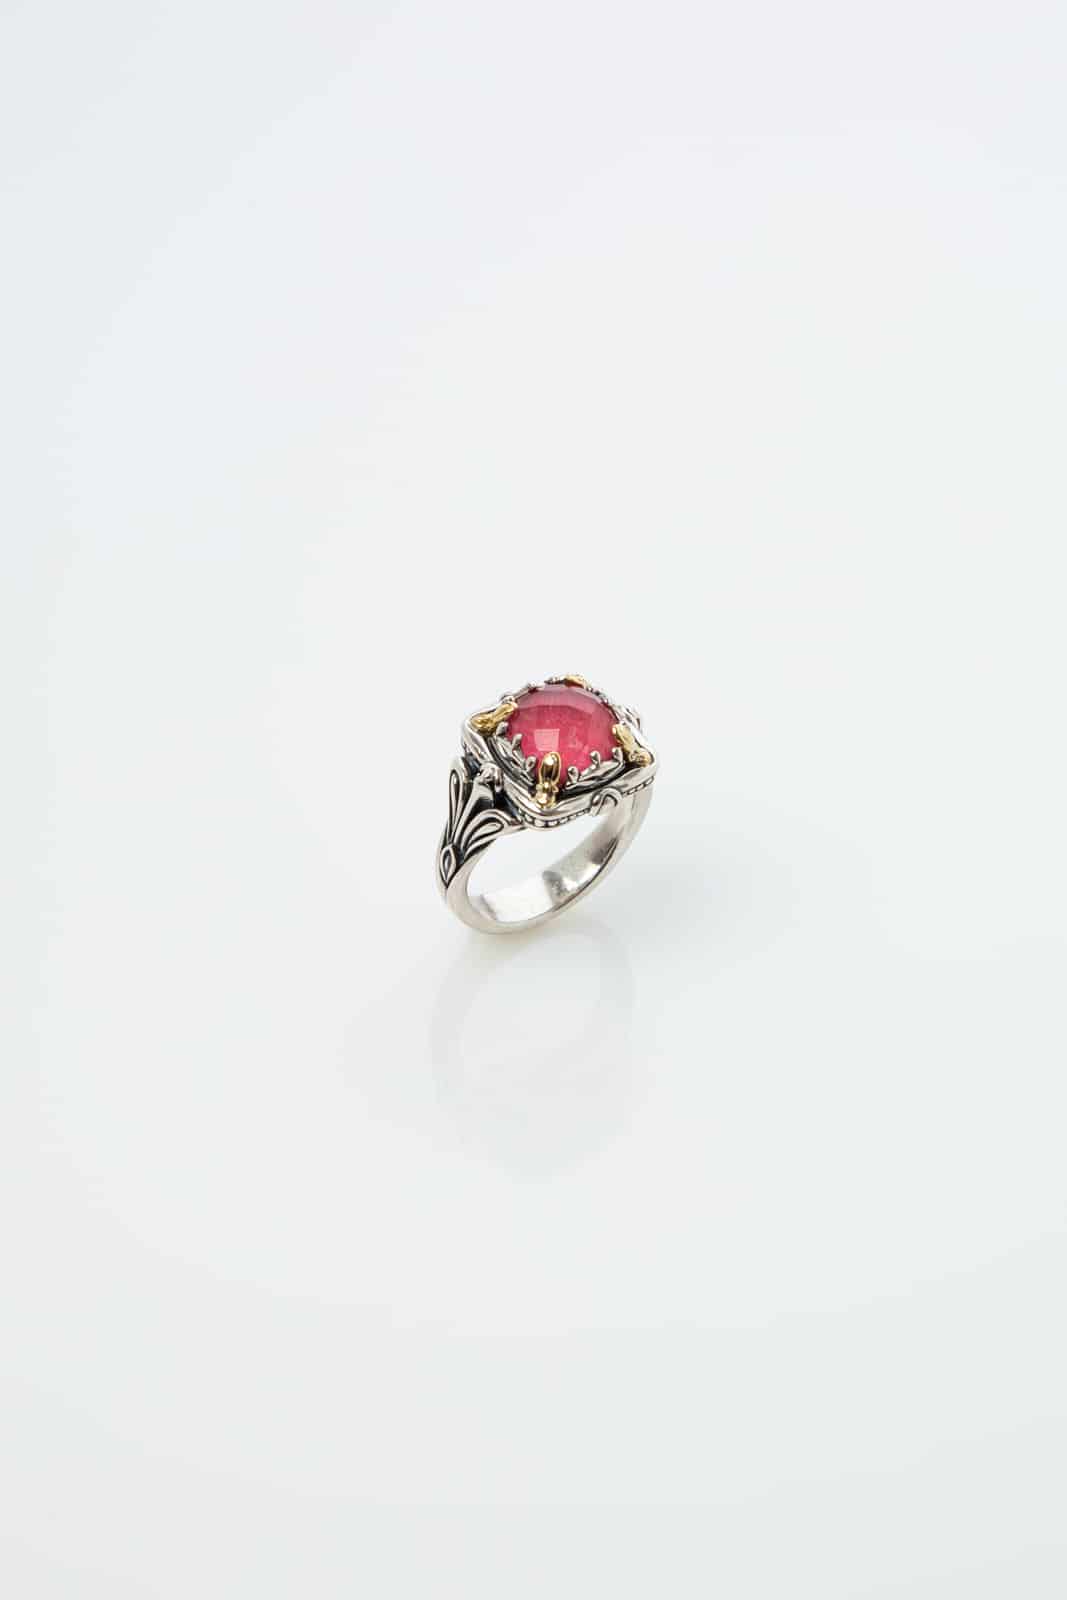 RING THULITE DOUBLET